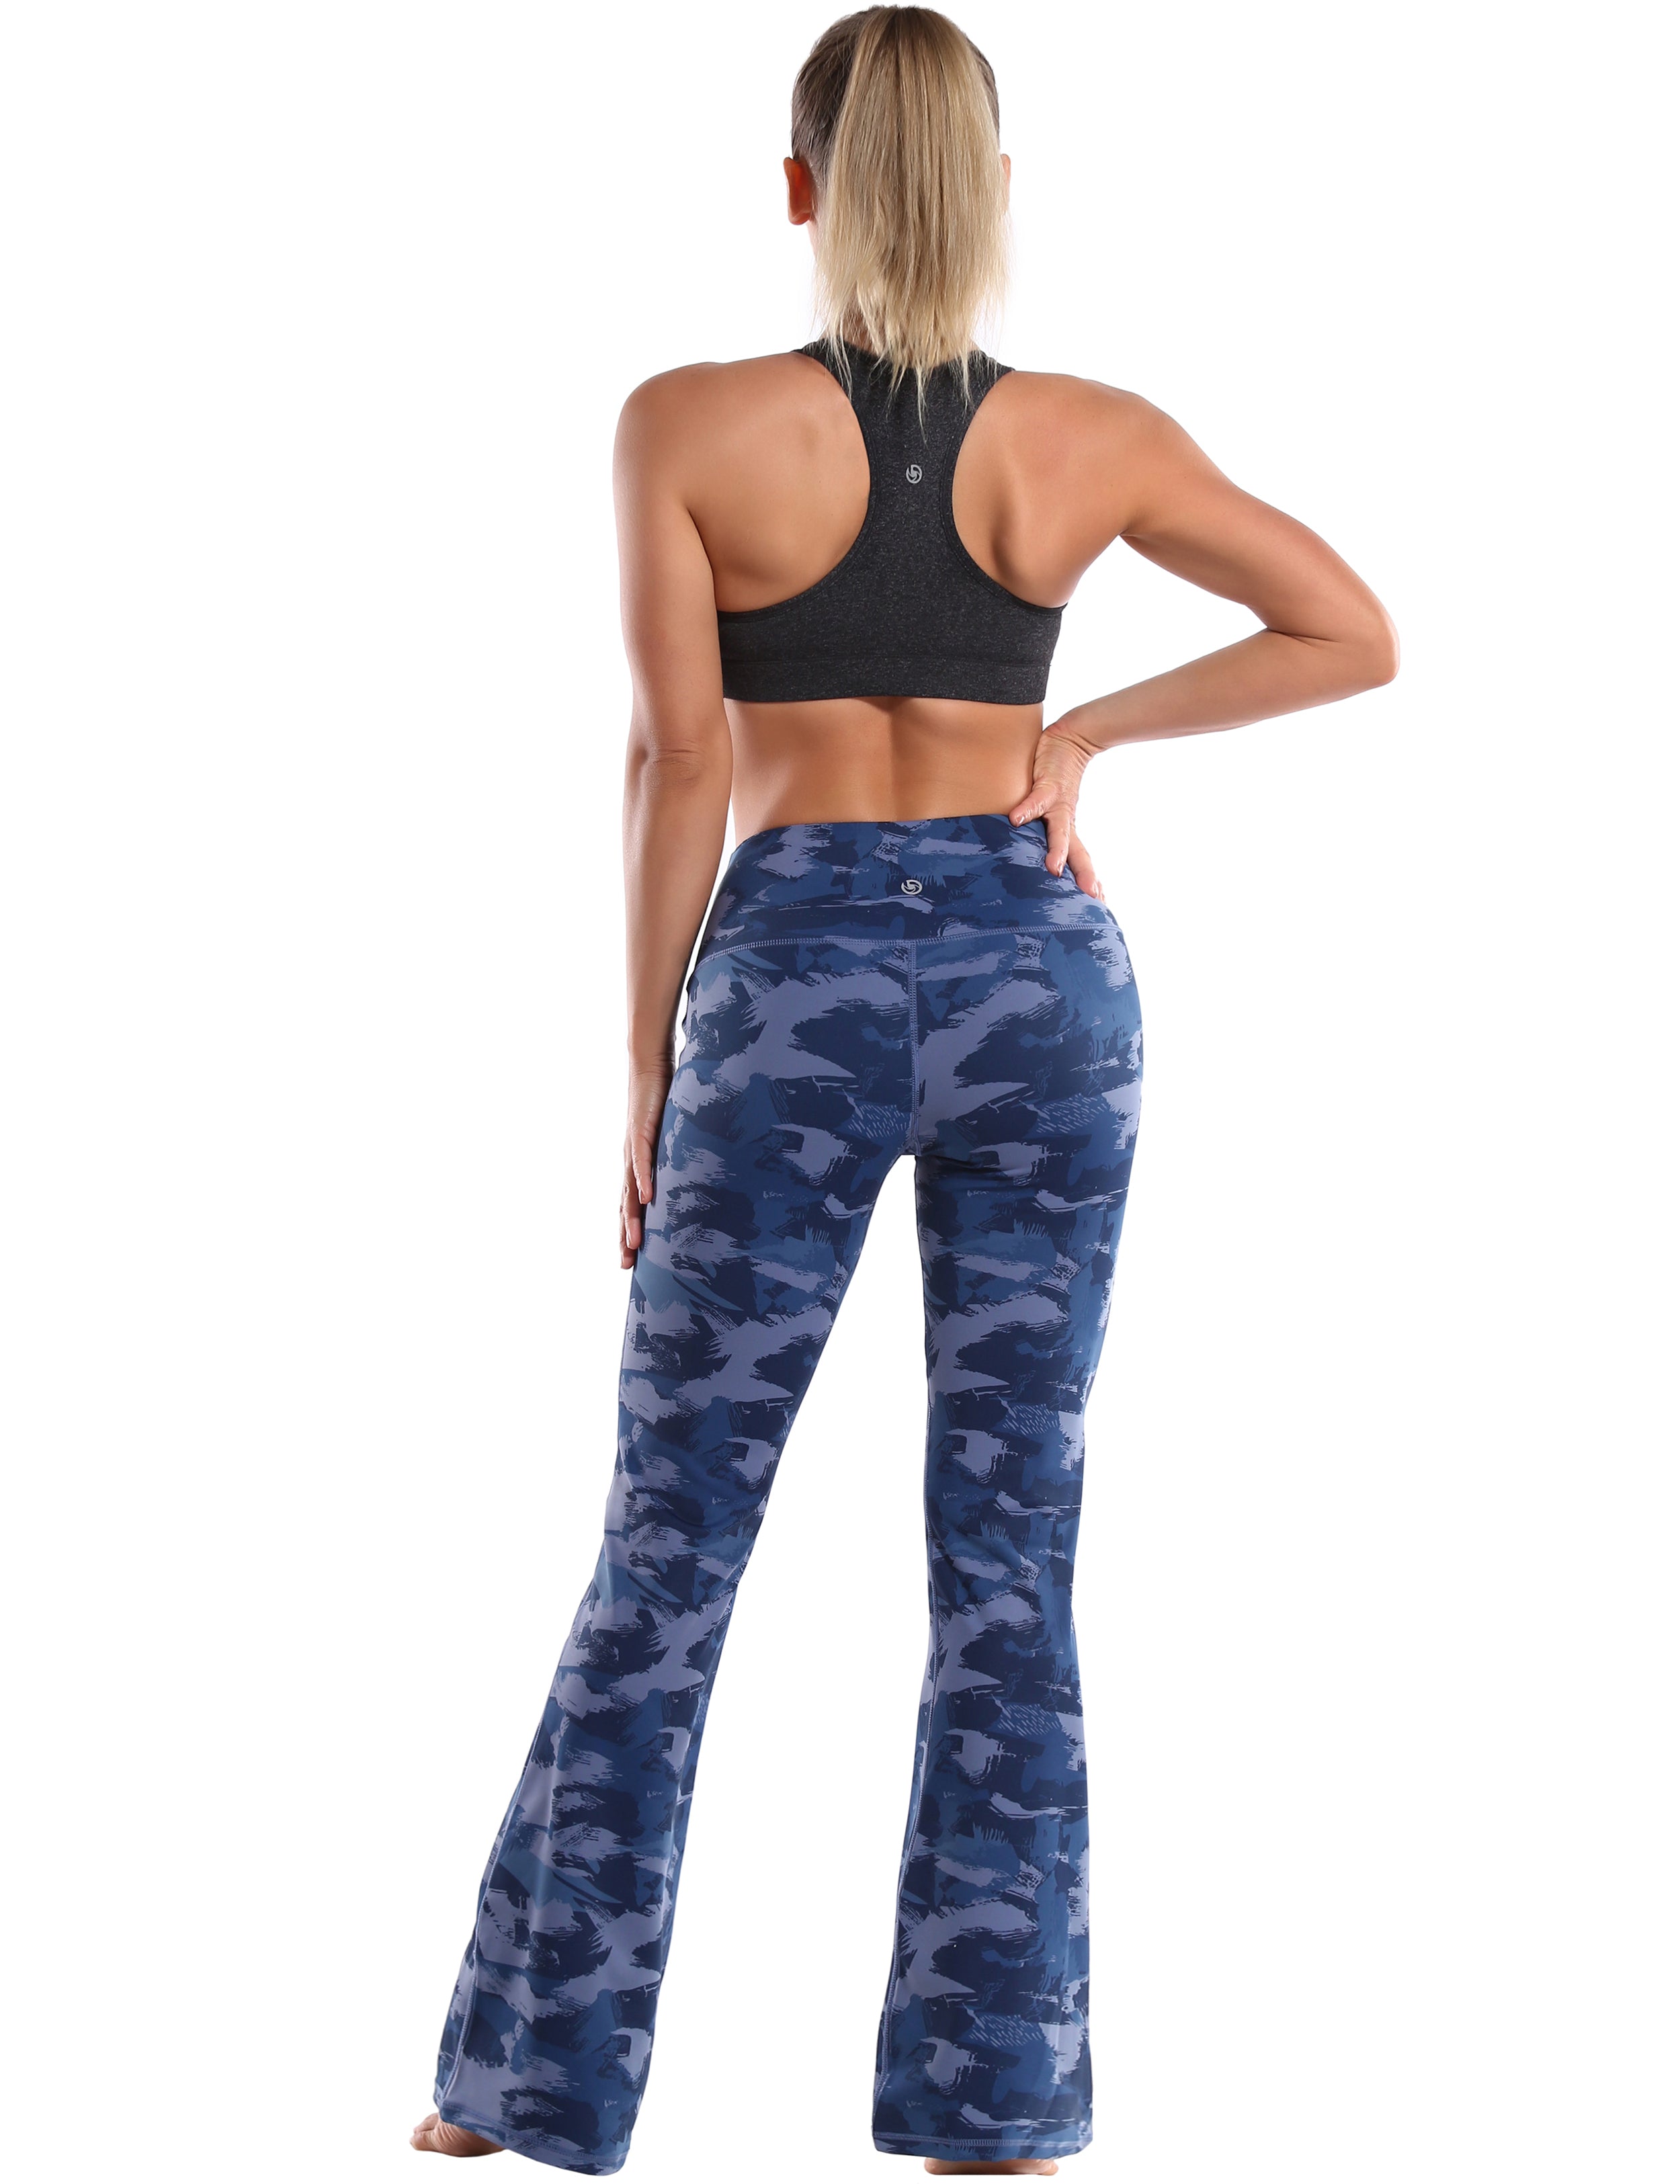 High Waist Printed Bootcut Leggings navy brushcamo 78%Polyester/22%Spandex Fabric doesn't attract lint easily 4-way stretch No see-through Moisture-wicking Tummy control Inner pocket Five lengths